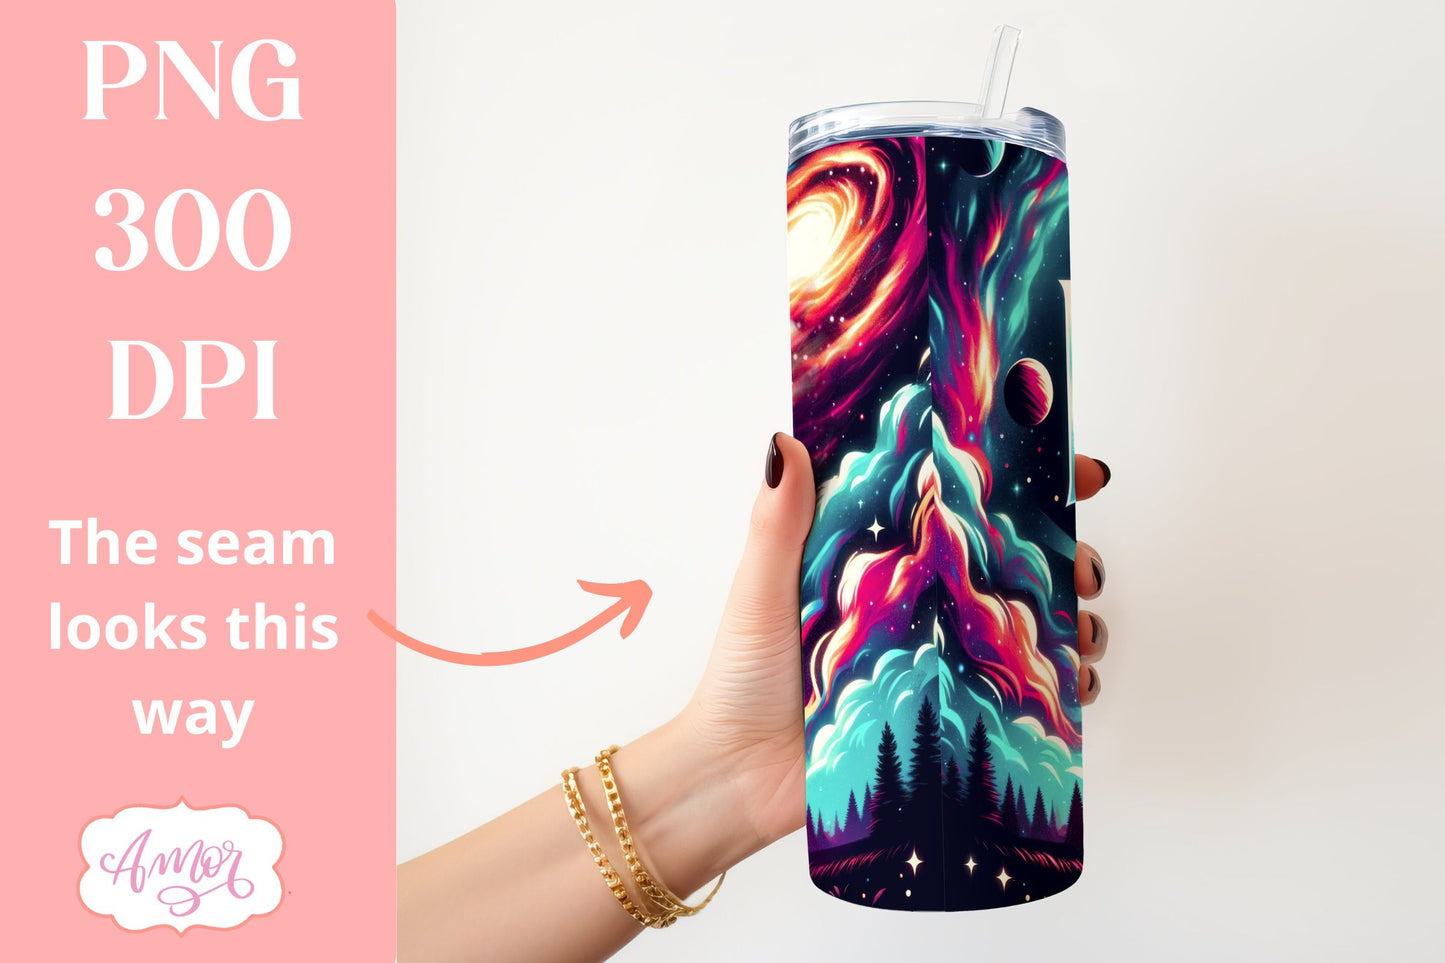 Best Mom Tumbler Wrap for Sublimation | Galaxy tumbler PNG